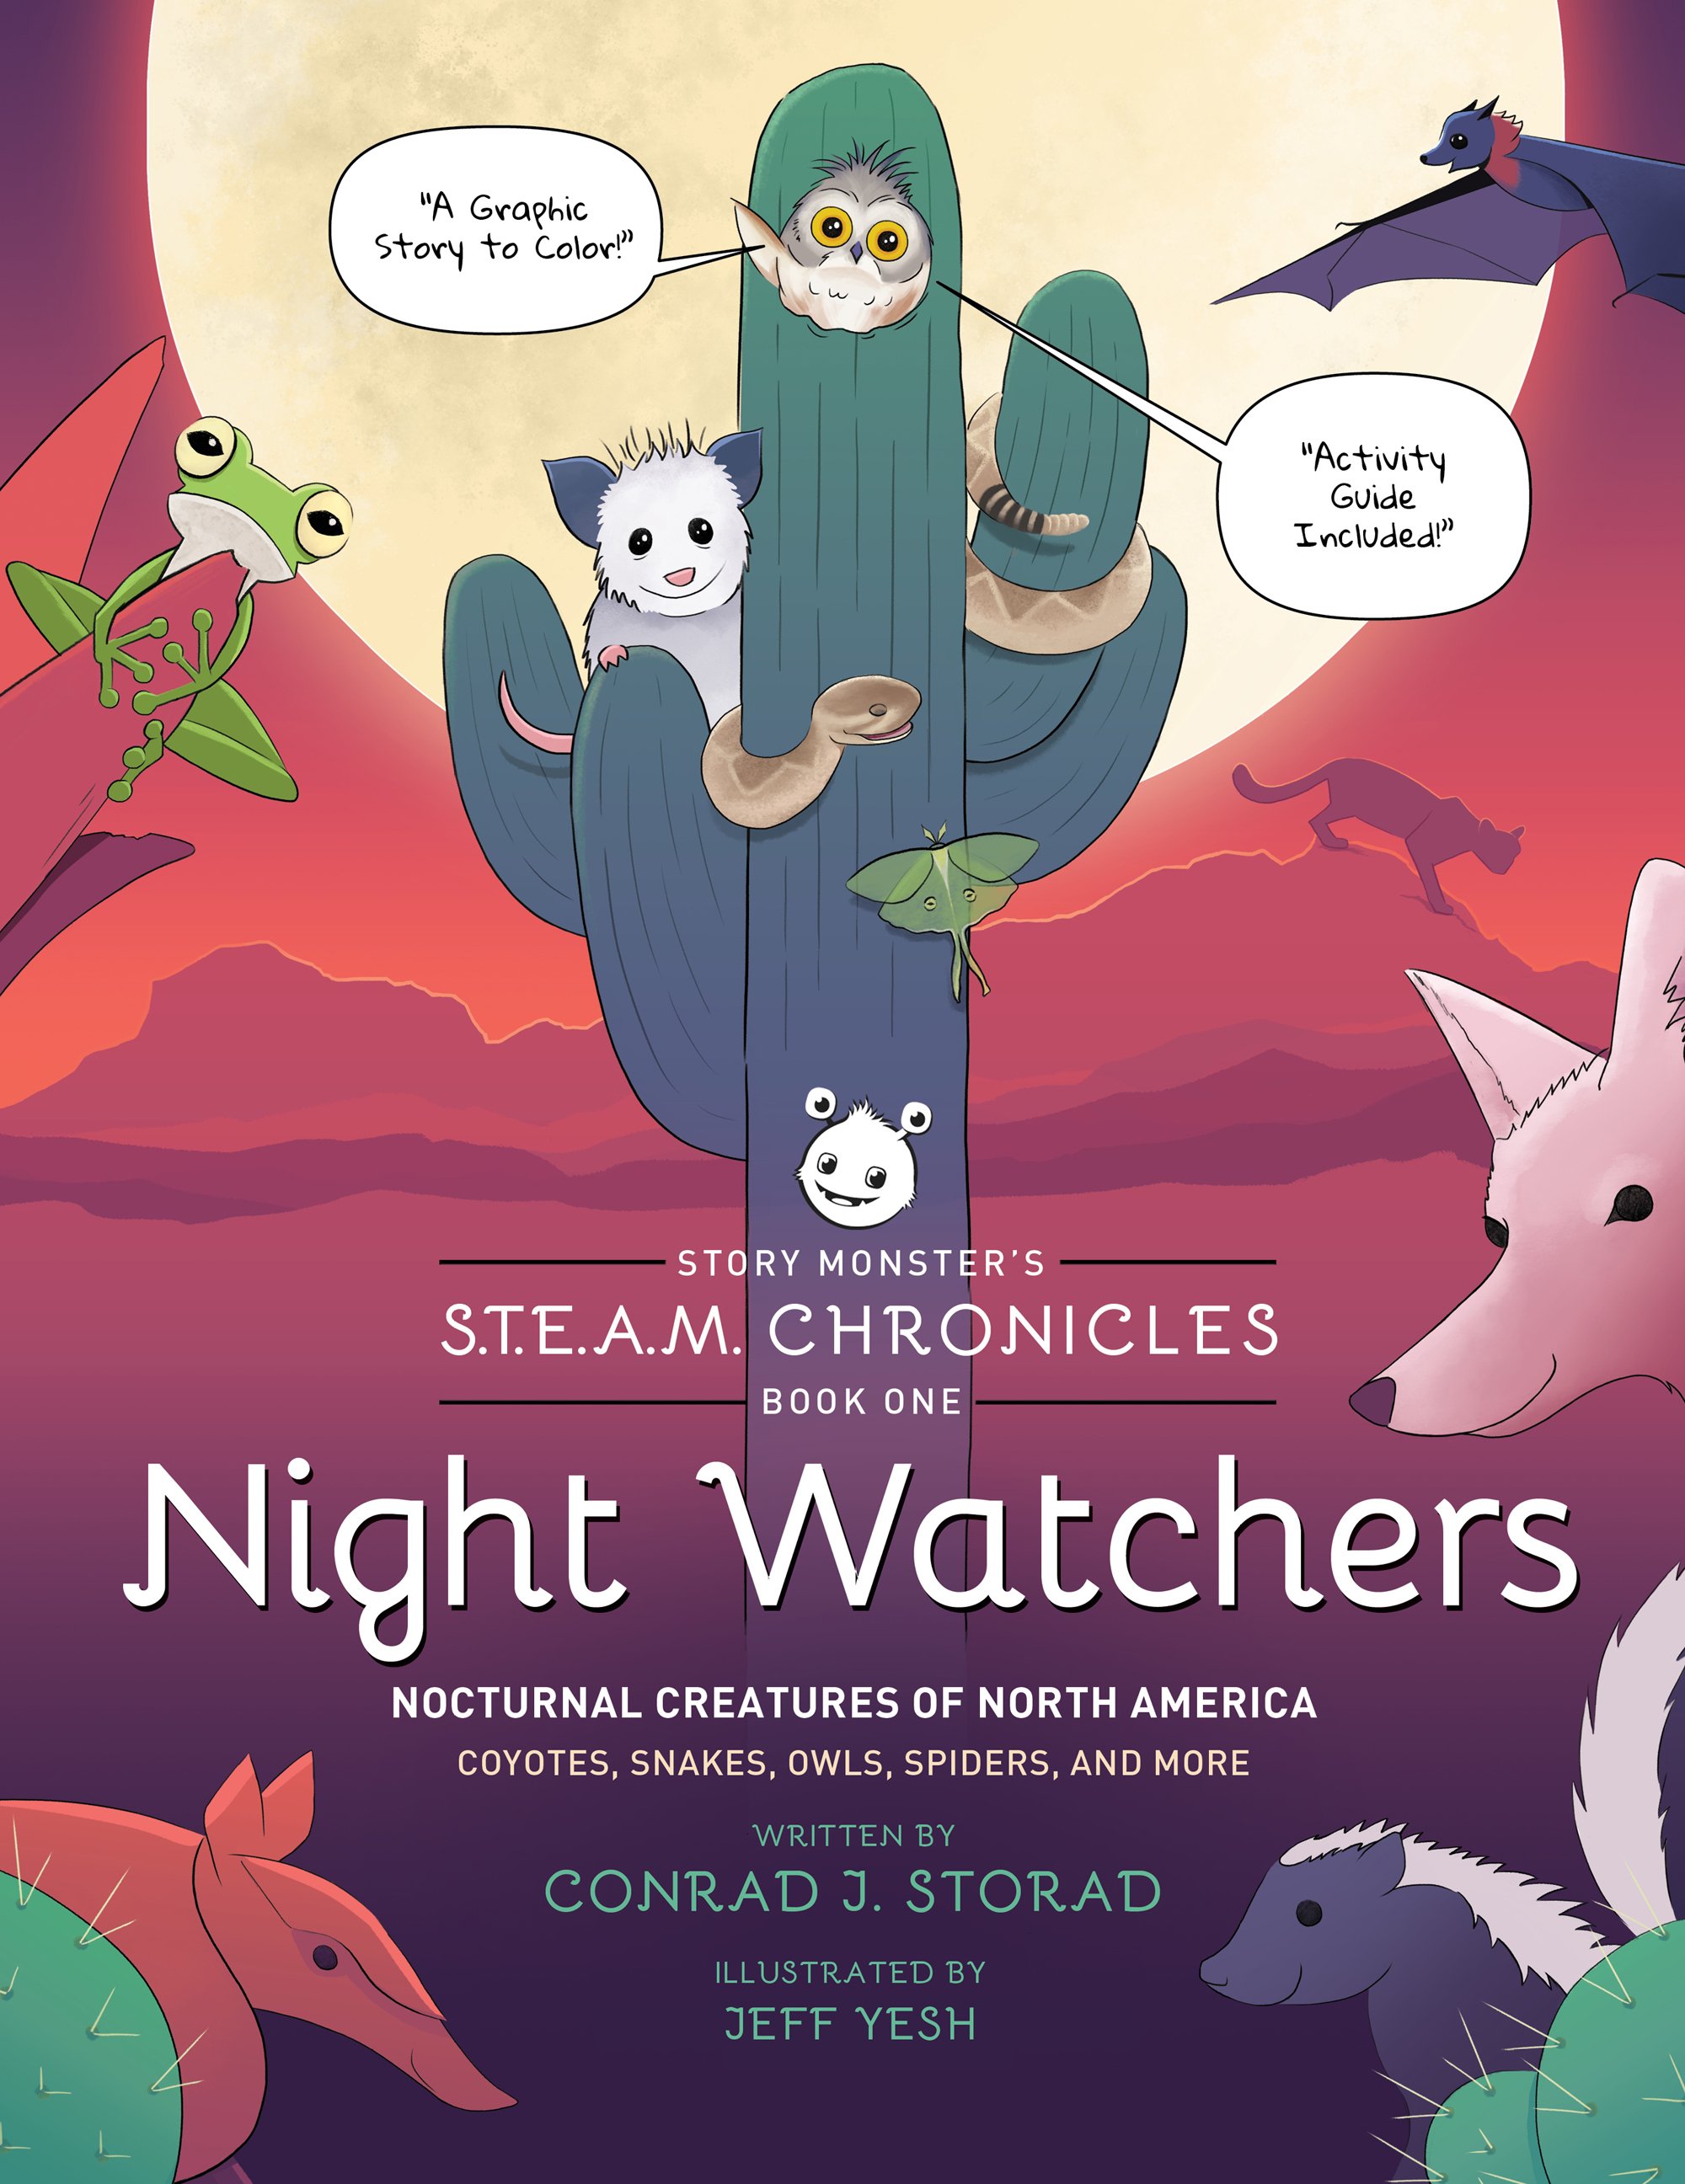 Story Monster's S.T.E.A.M. Chronicles Book One Night Watchers: Nocturnal Creatures of North America Coyotes, Snakes, Owls, Spiders and More